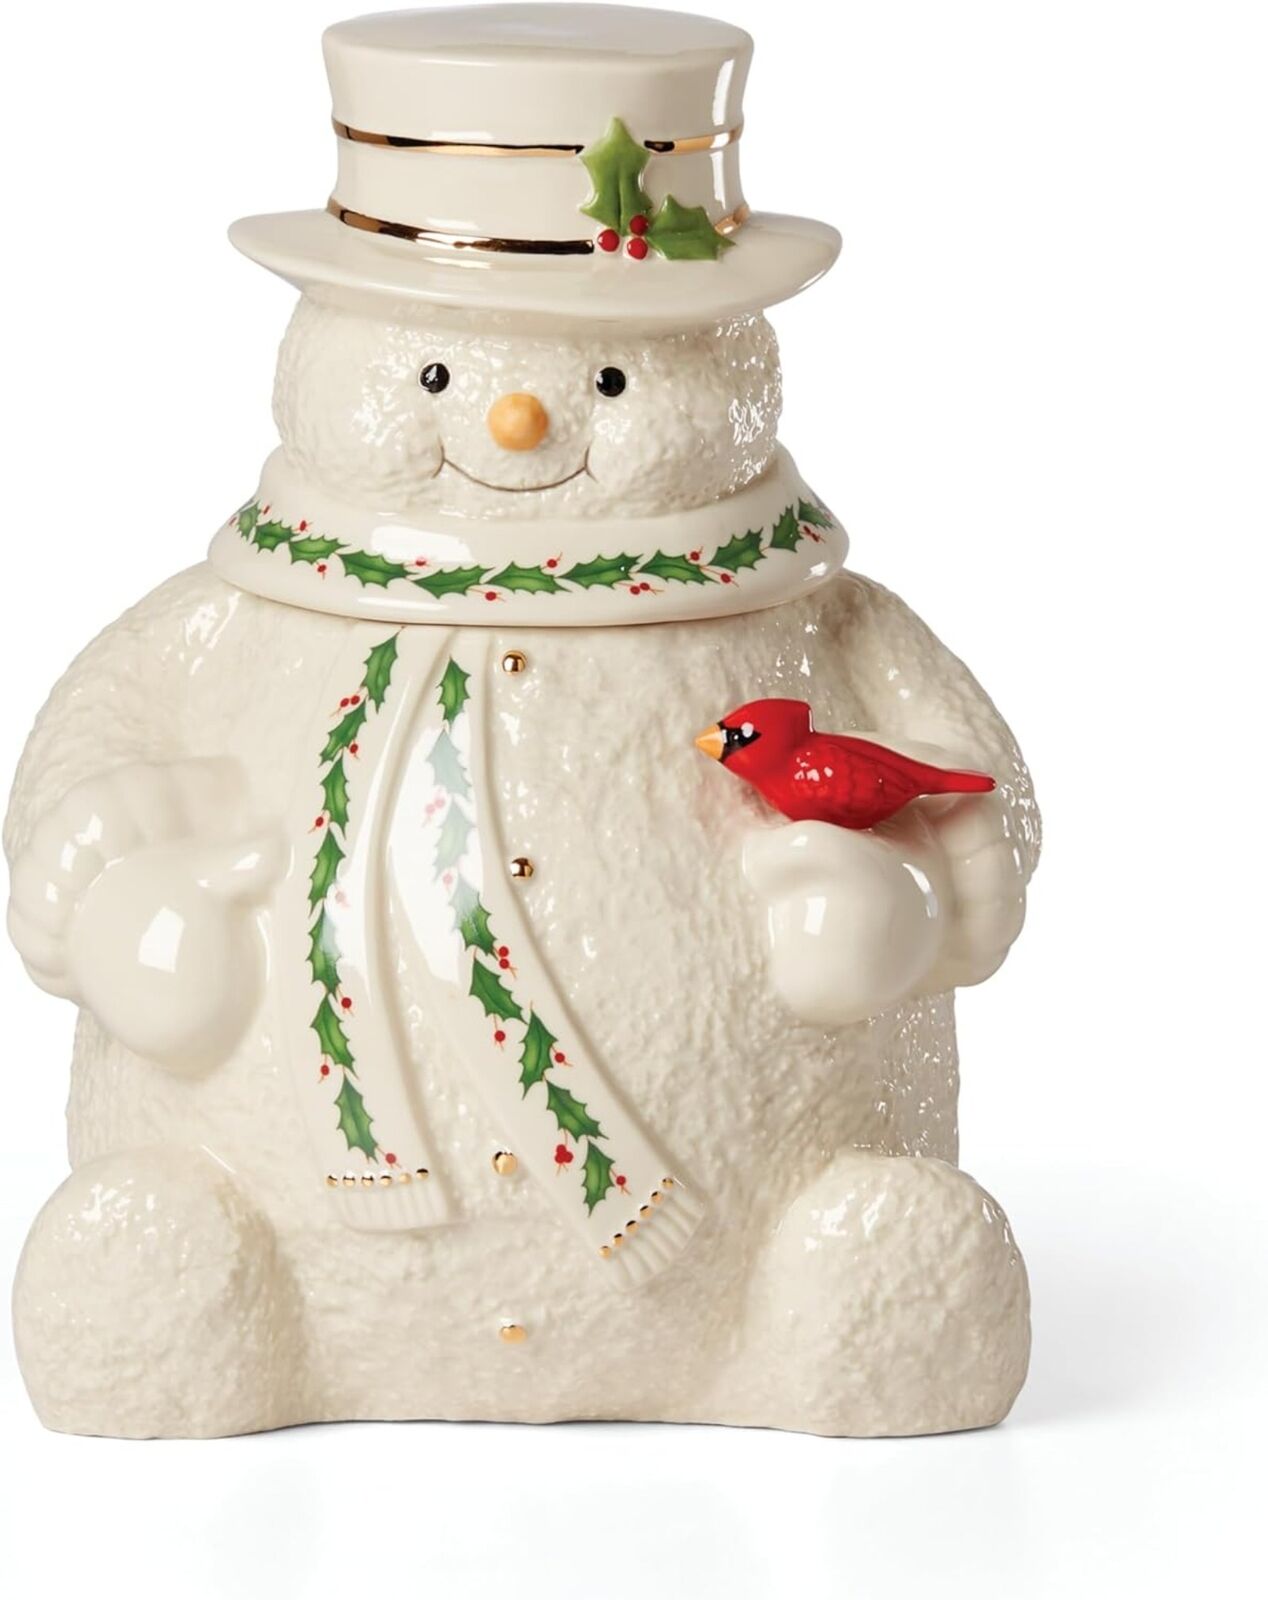 Happy Holly Days Snowman Cookie Jar, 4.85, Porcelain, Ivory, Hand Wash Only